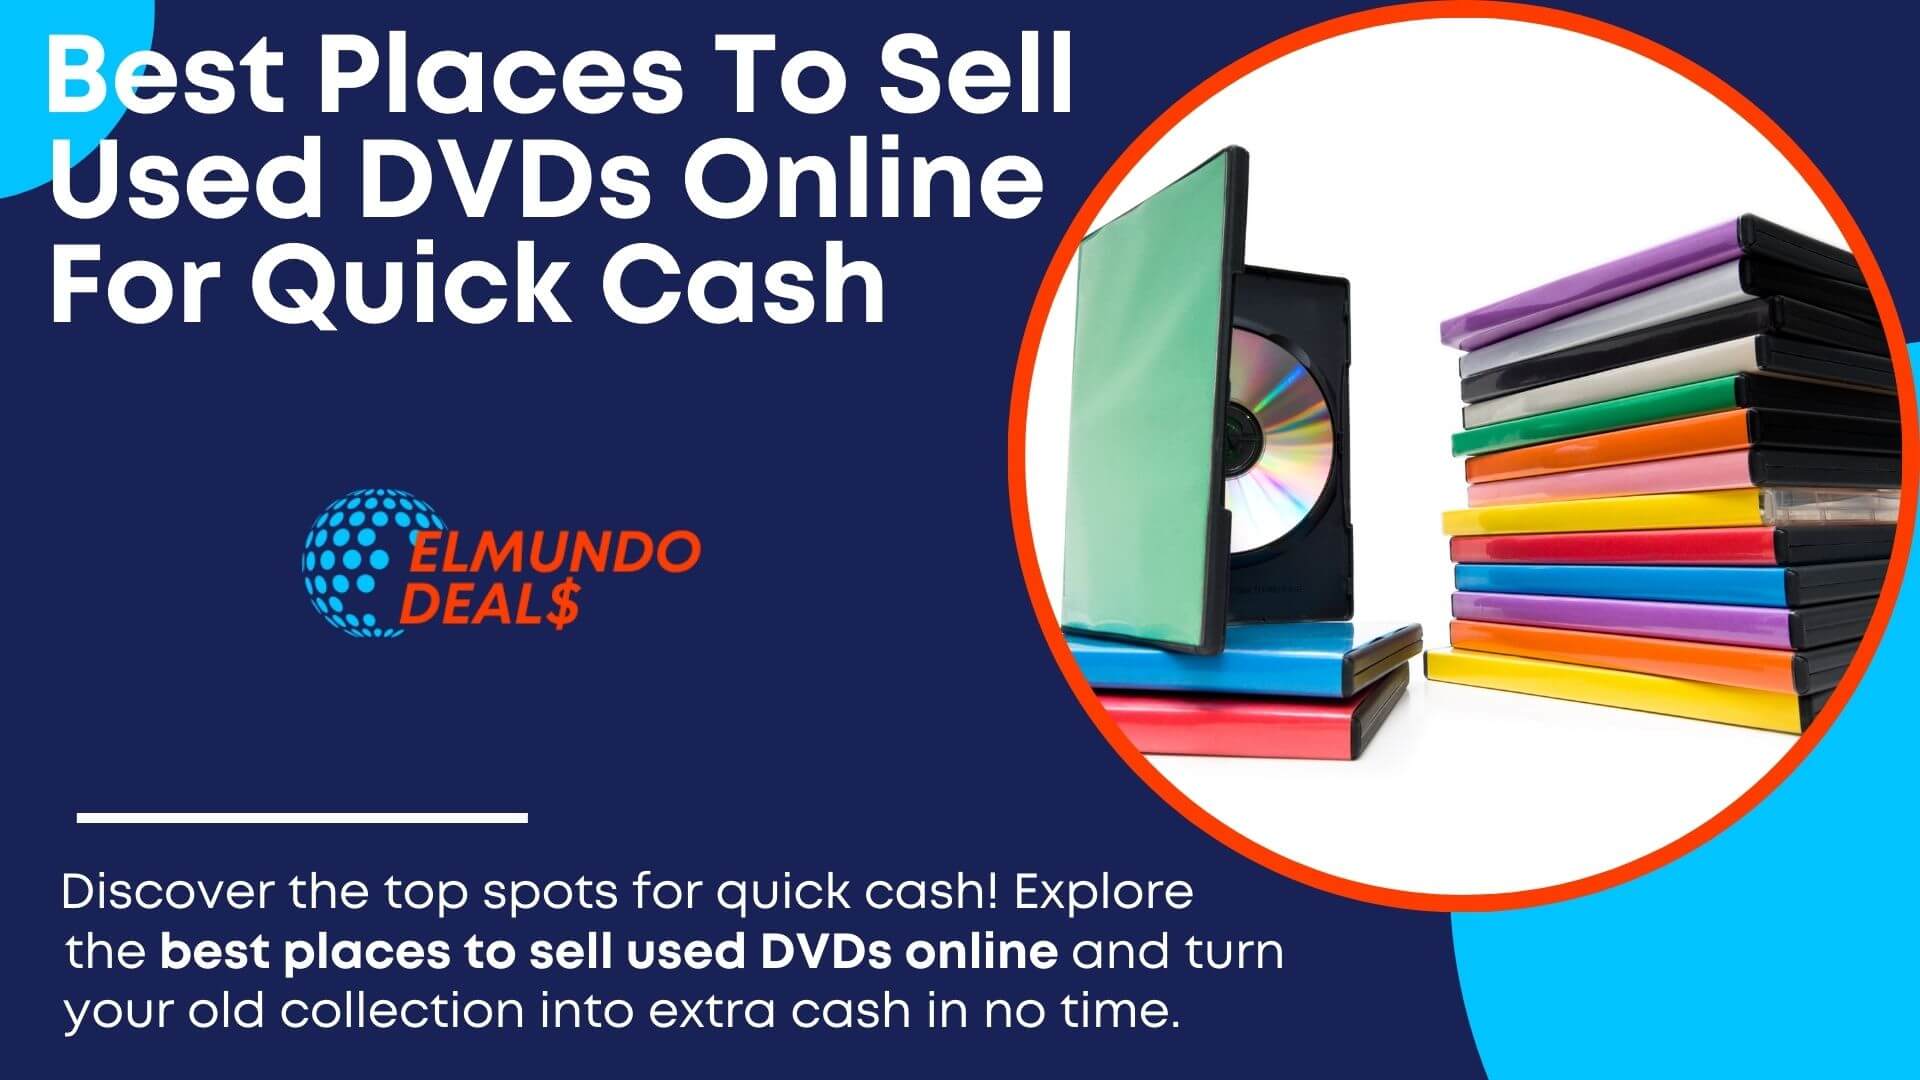 Best Places To Sell Used DVDs Online For Quick Cash